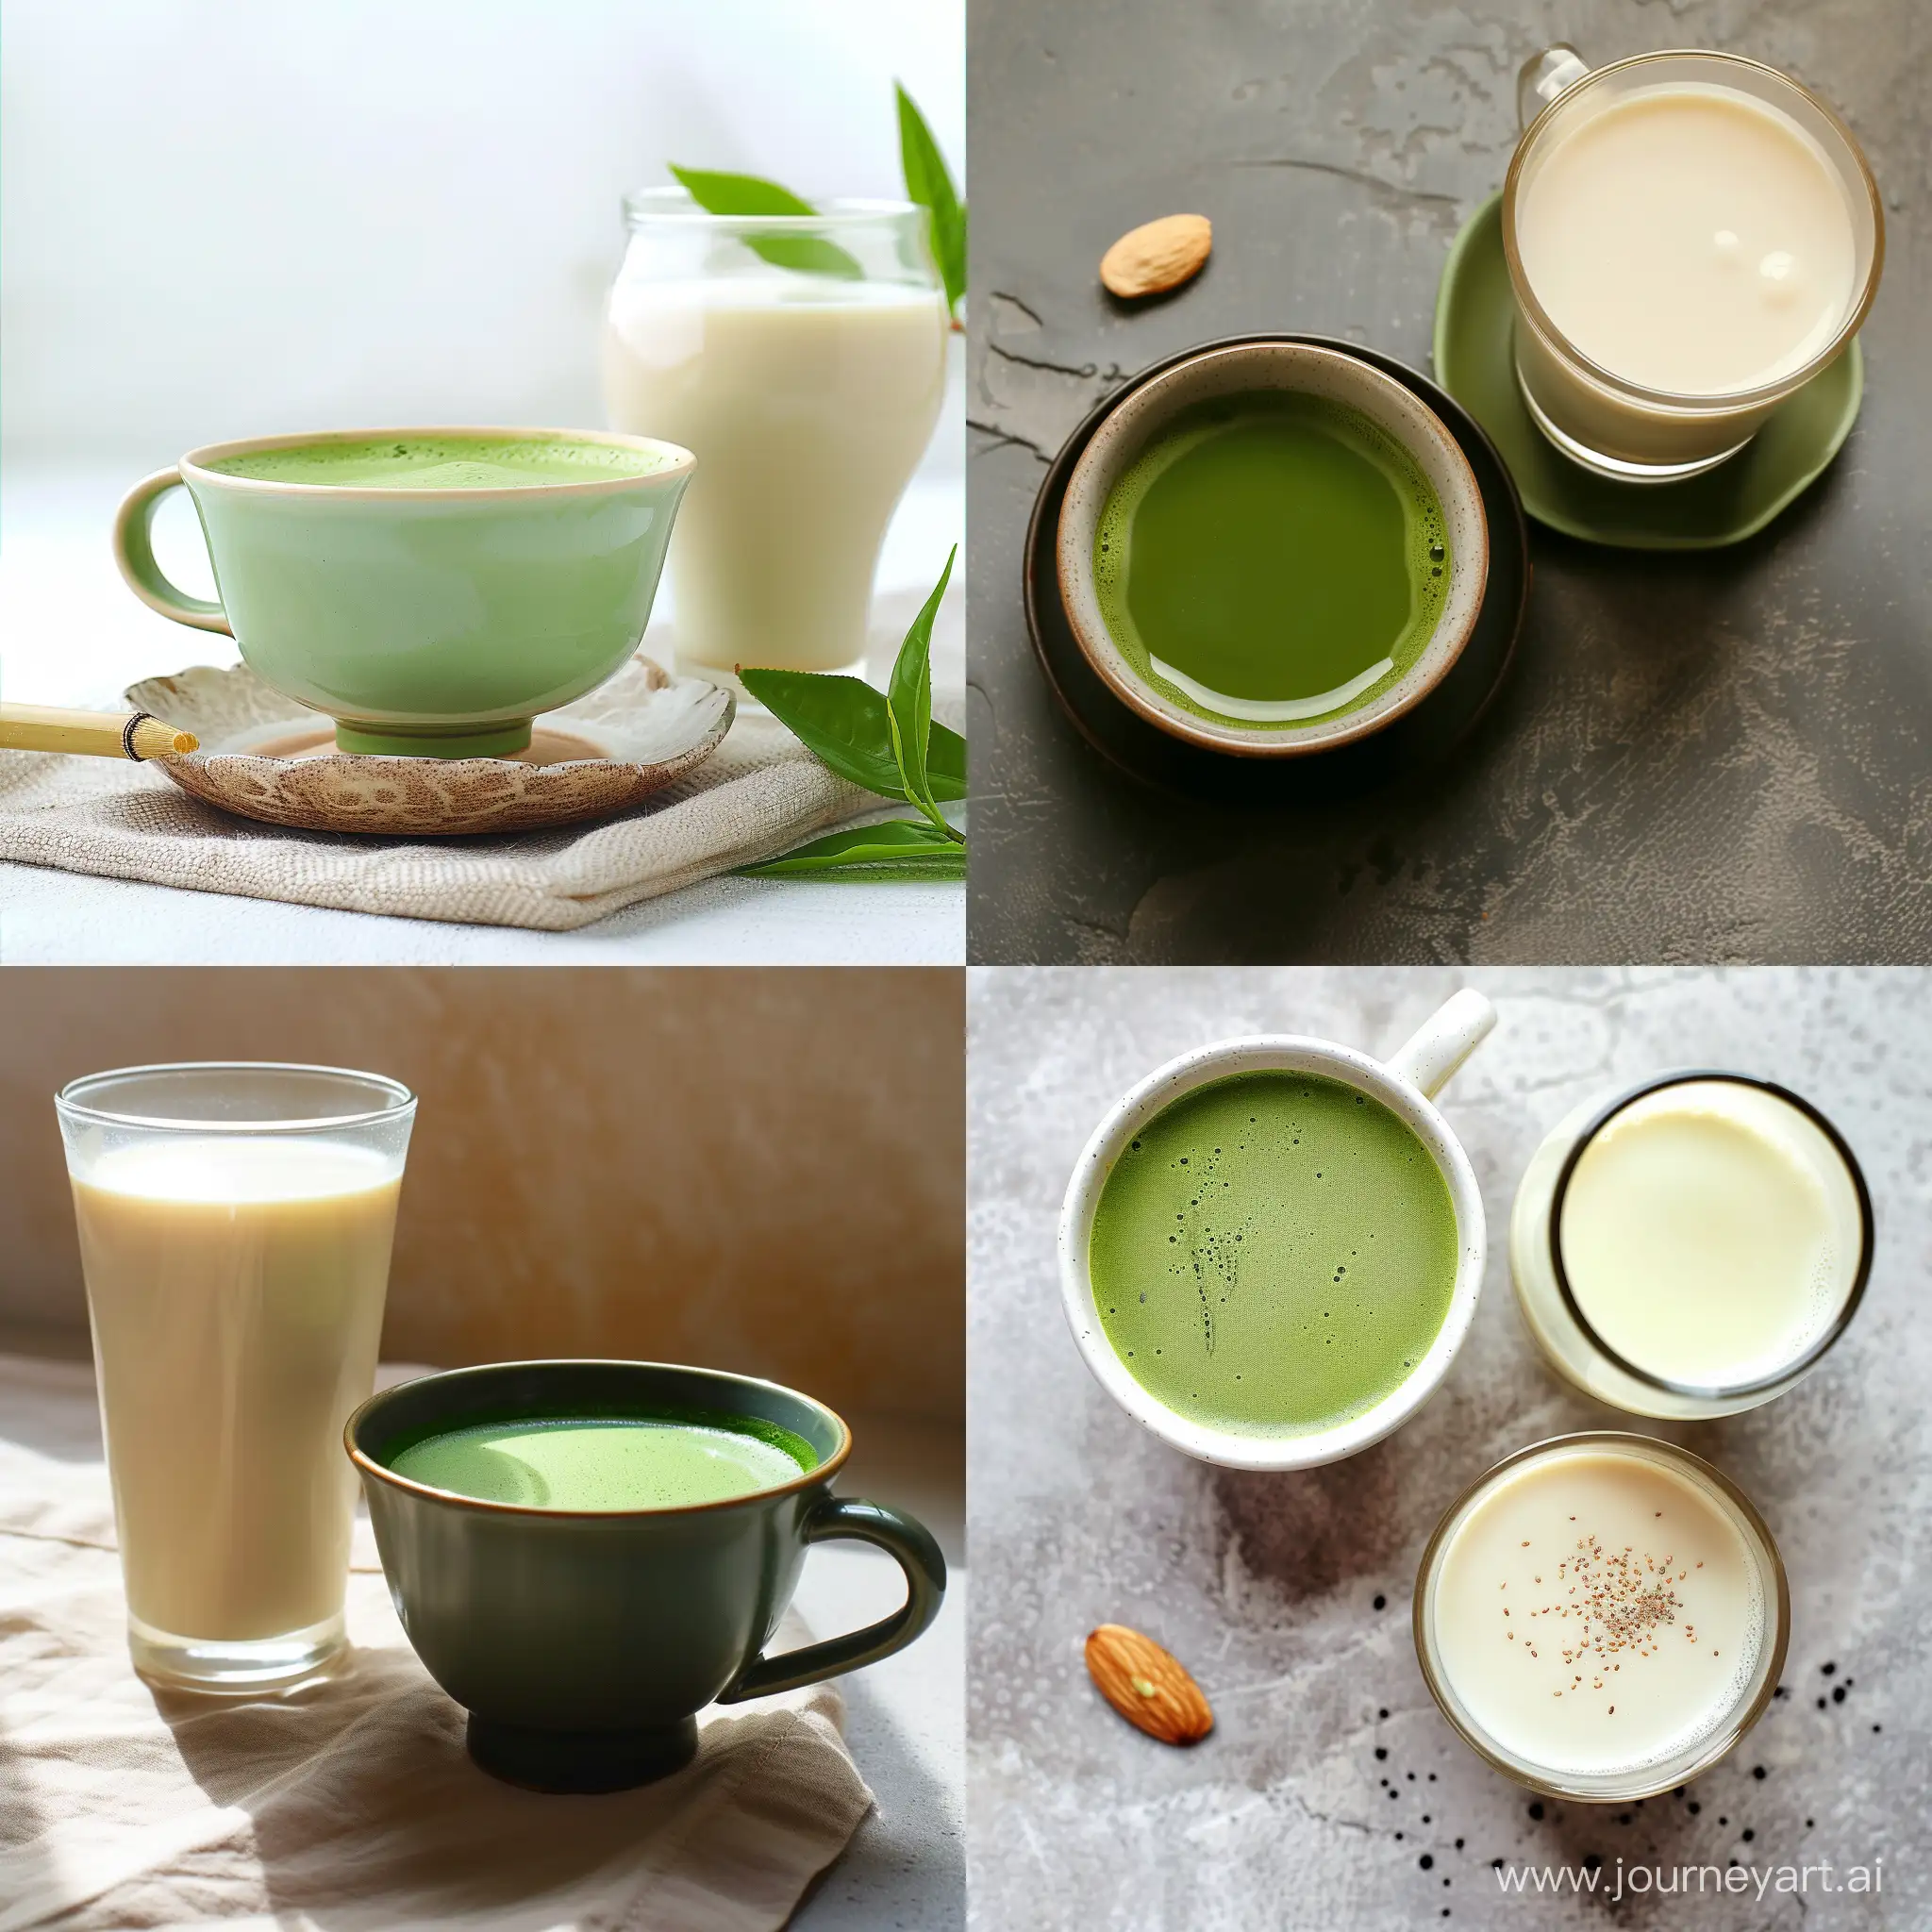 Real photo of a cup of matcha tea and a glass of almond milk. All details are natural, real and accurate.